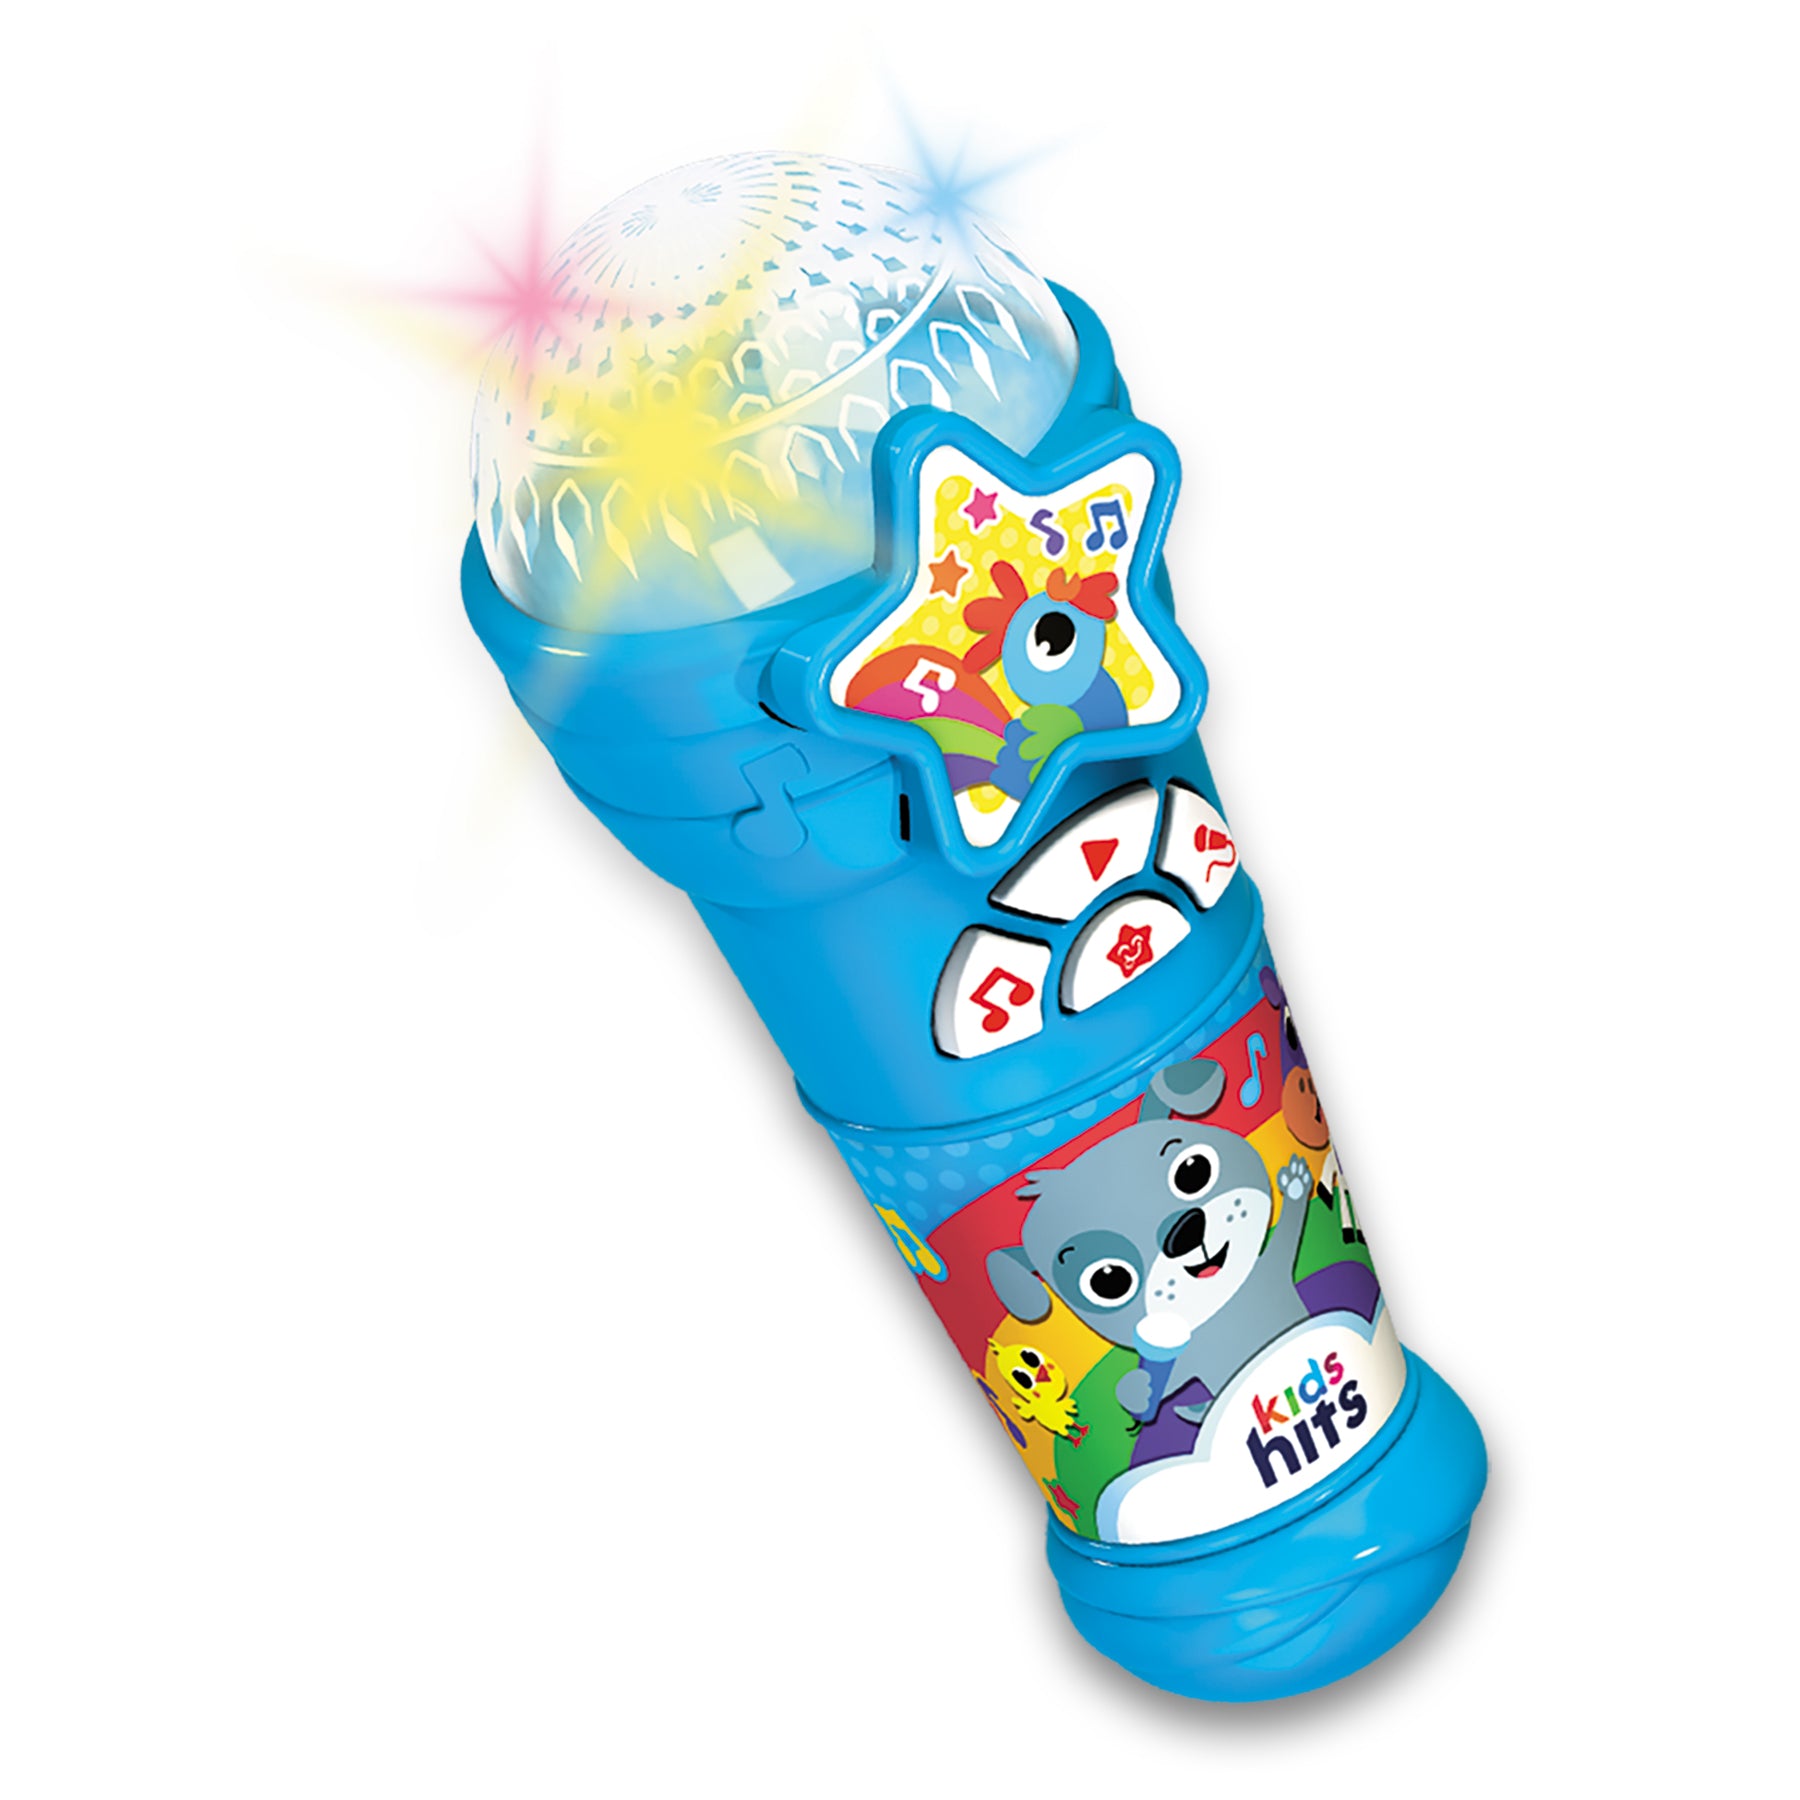 Kids Hits Educational Toddler Lightshow Microphone Toy Popular Songs Blue